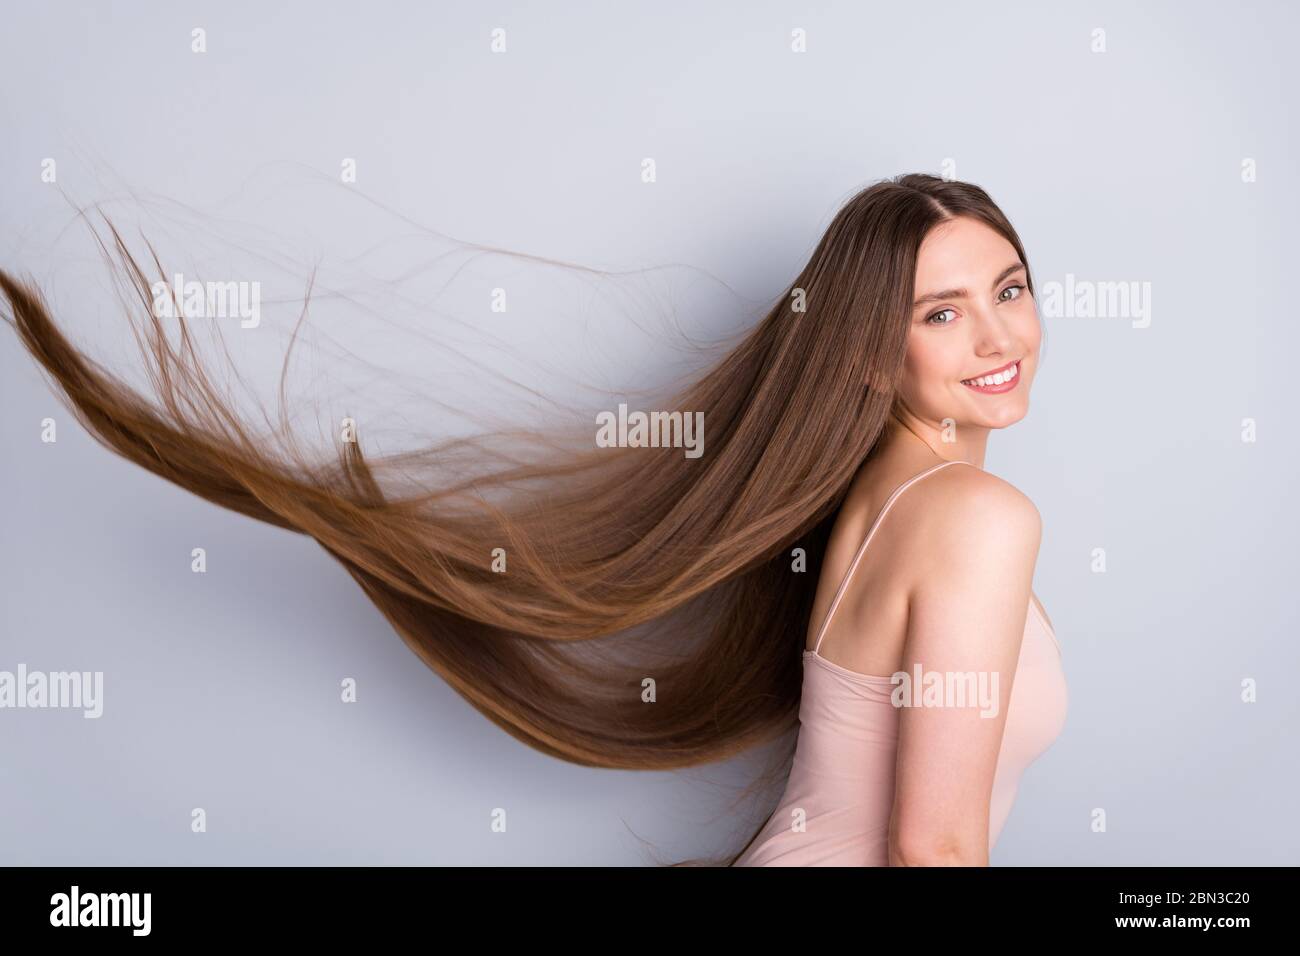 Rendering Straight Brown Hair Isolated Stock Photo by ©grbrenders 583328928